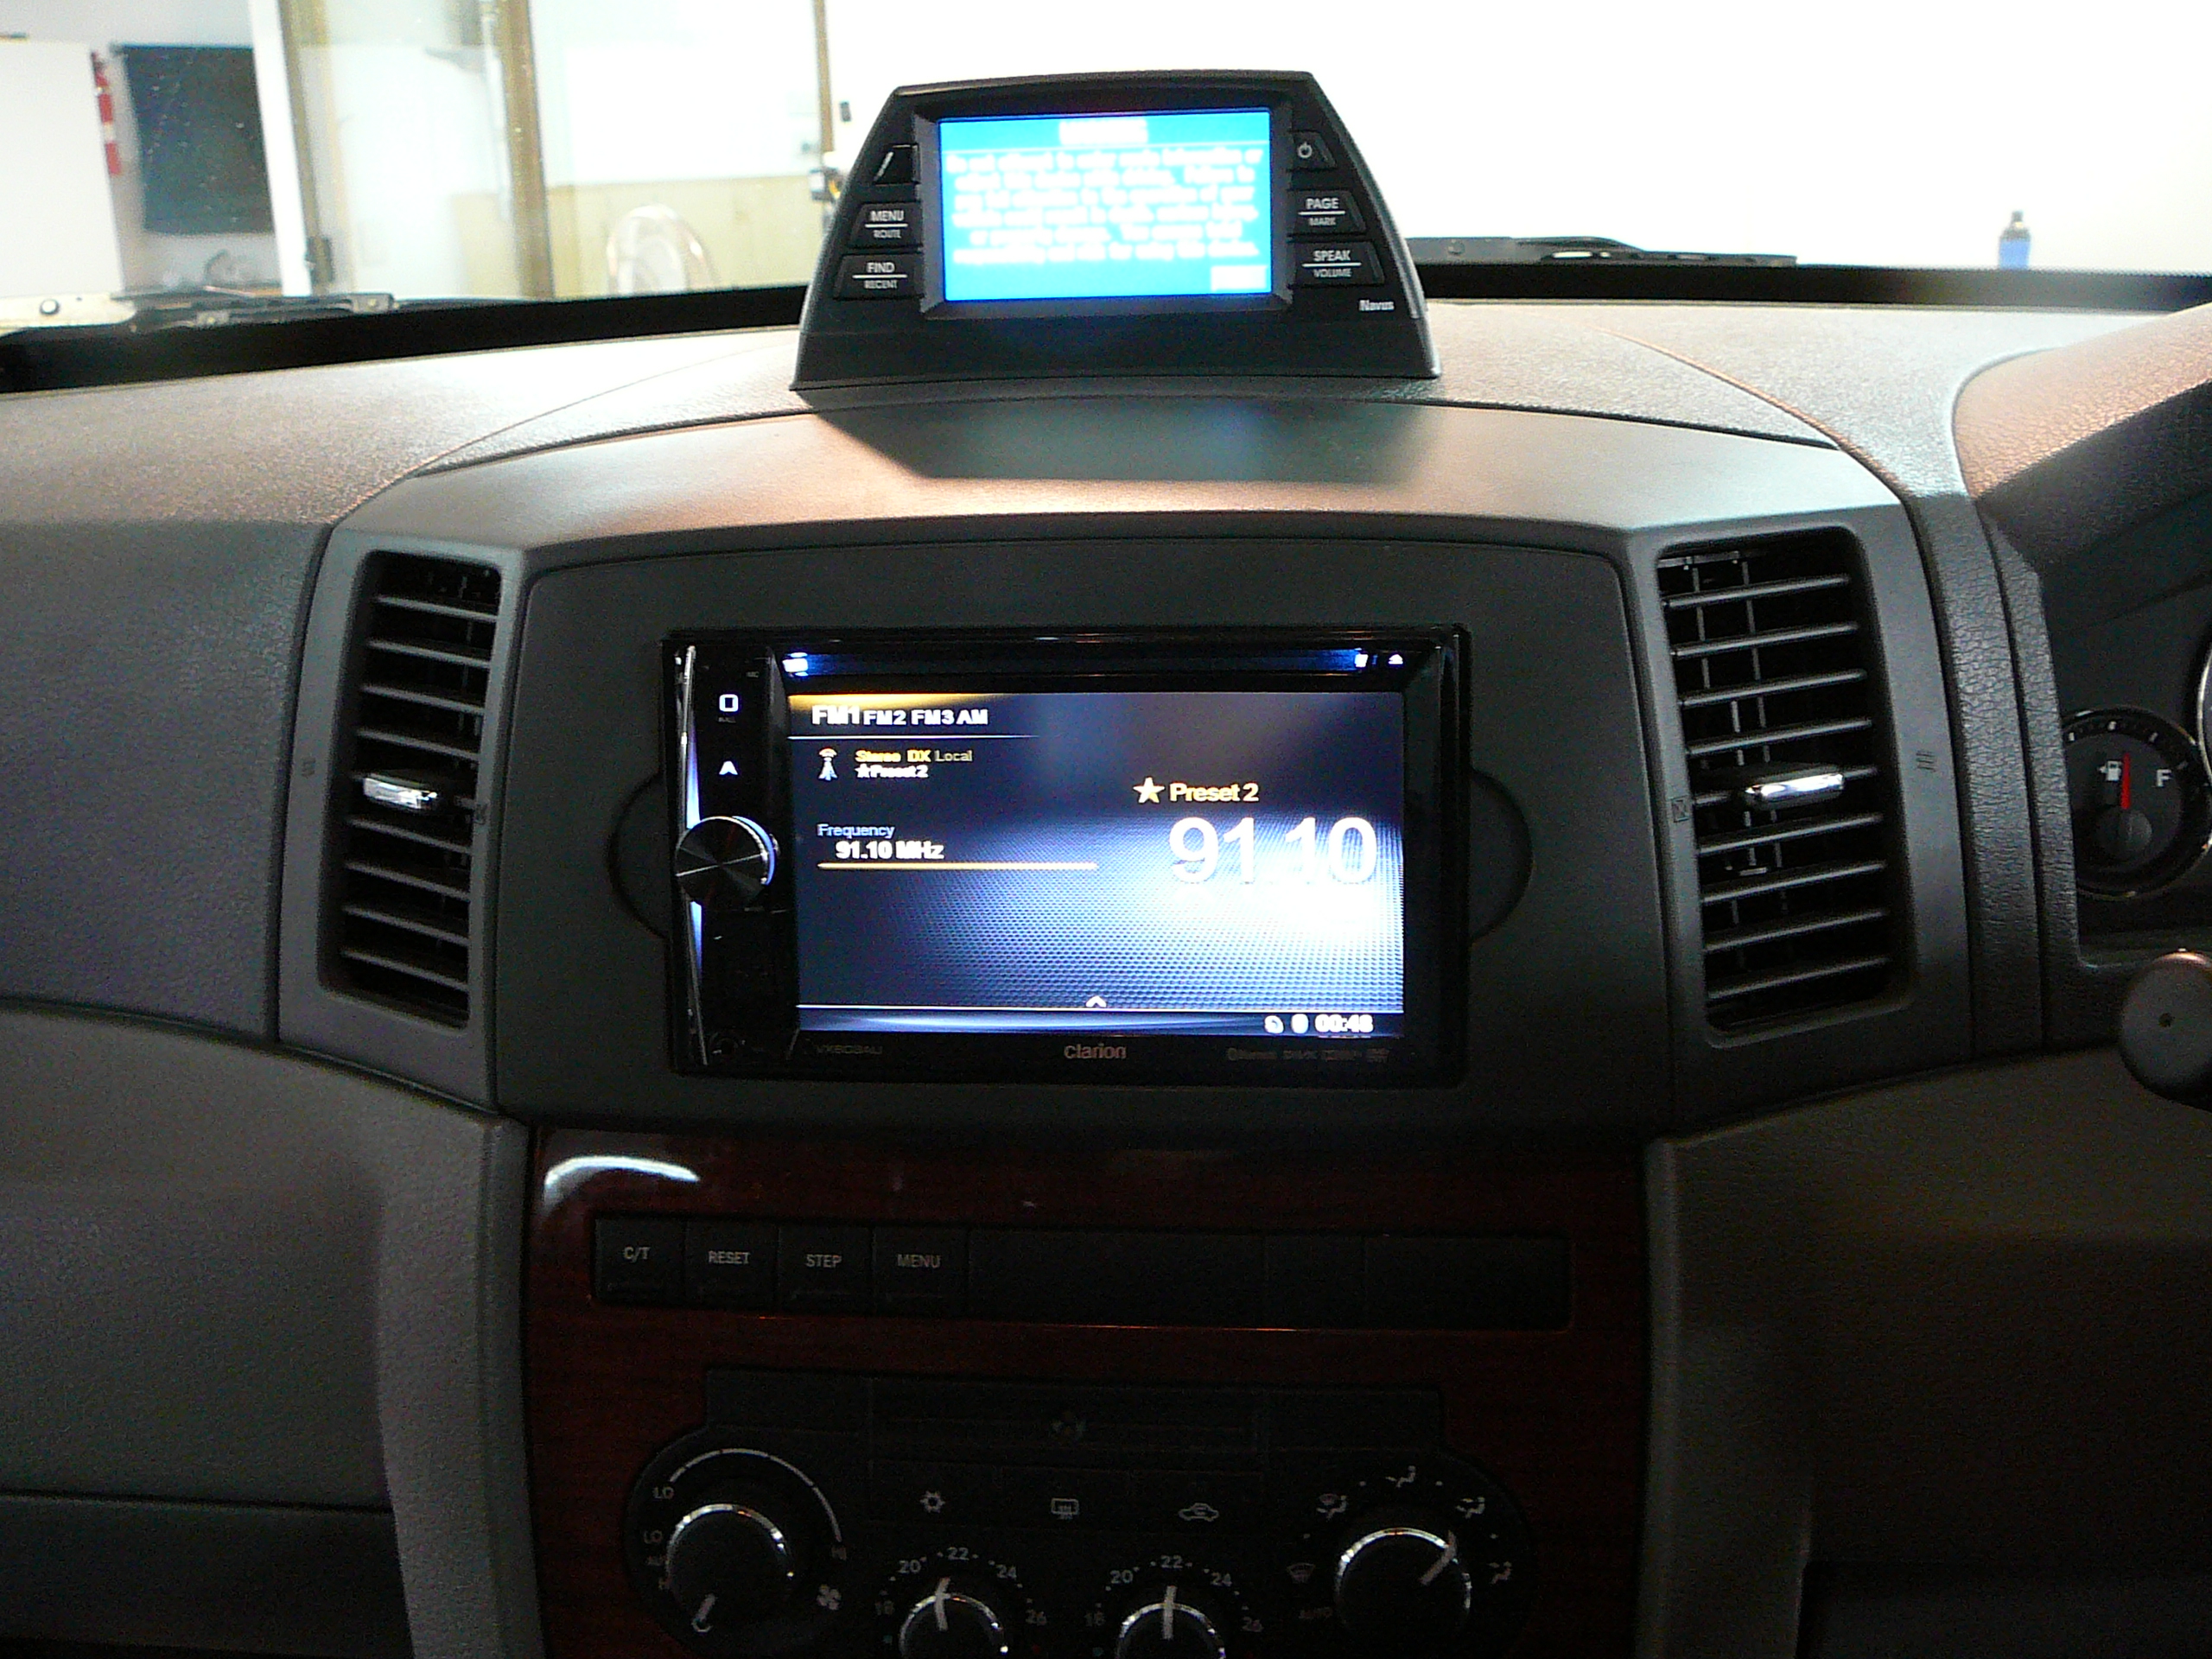 Jeep Grand Cherokee 2006, Clarion GPS Navigation System